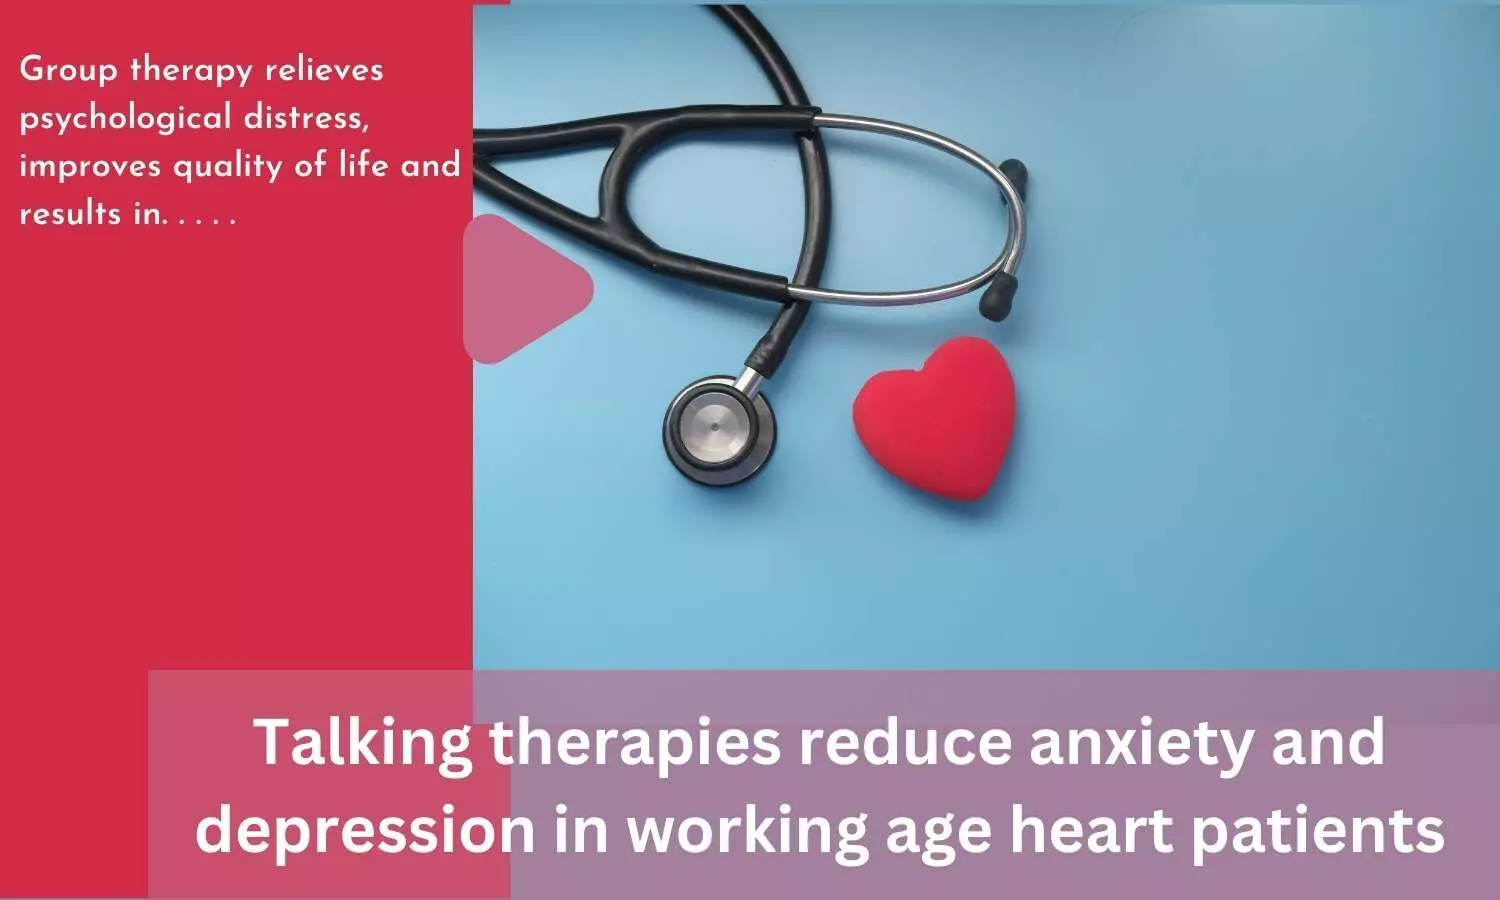 Talking therapies reduce anxiety and depression in working age heart patients